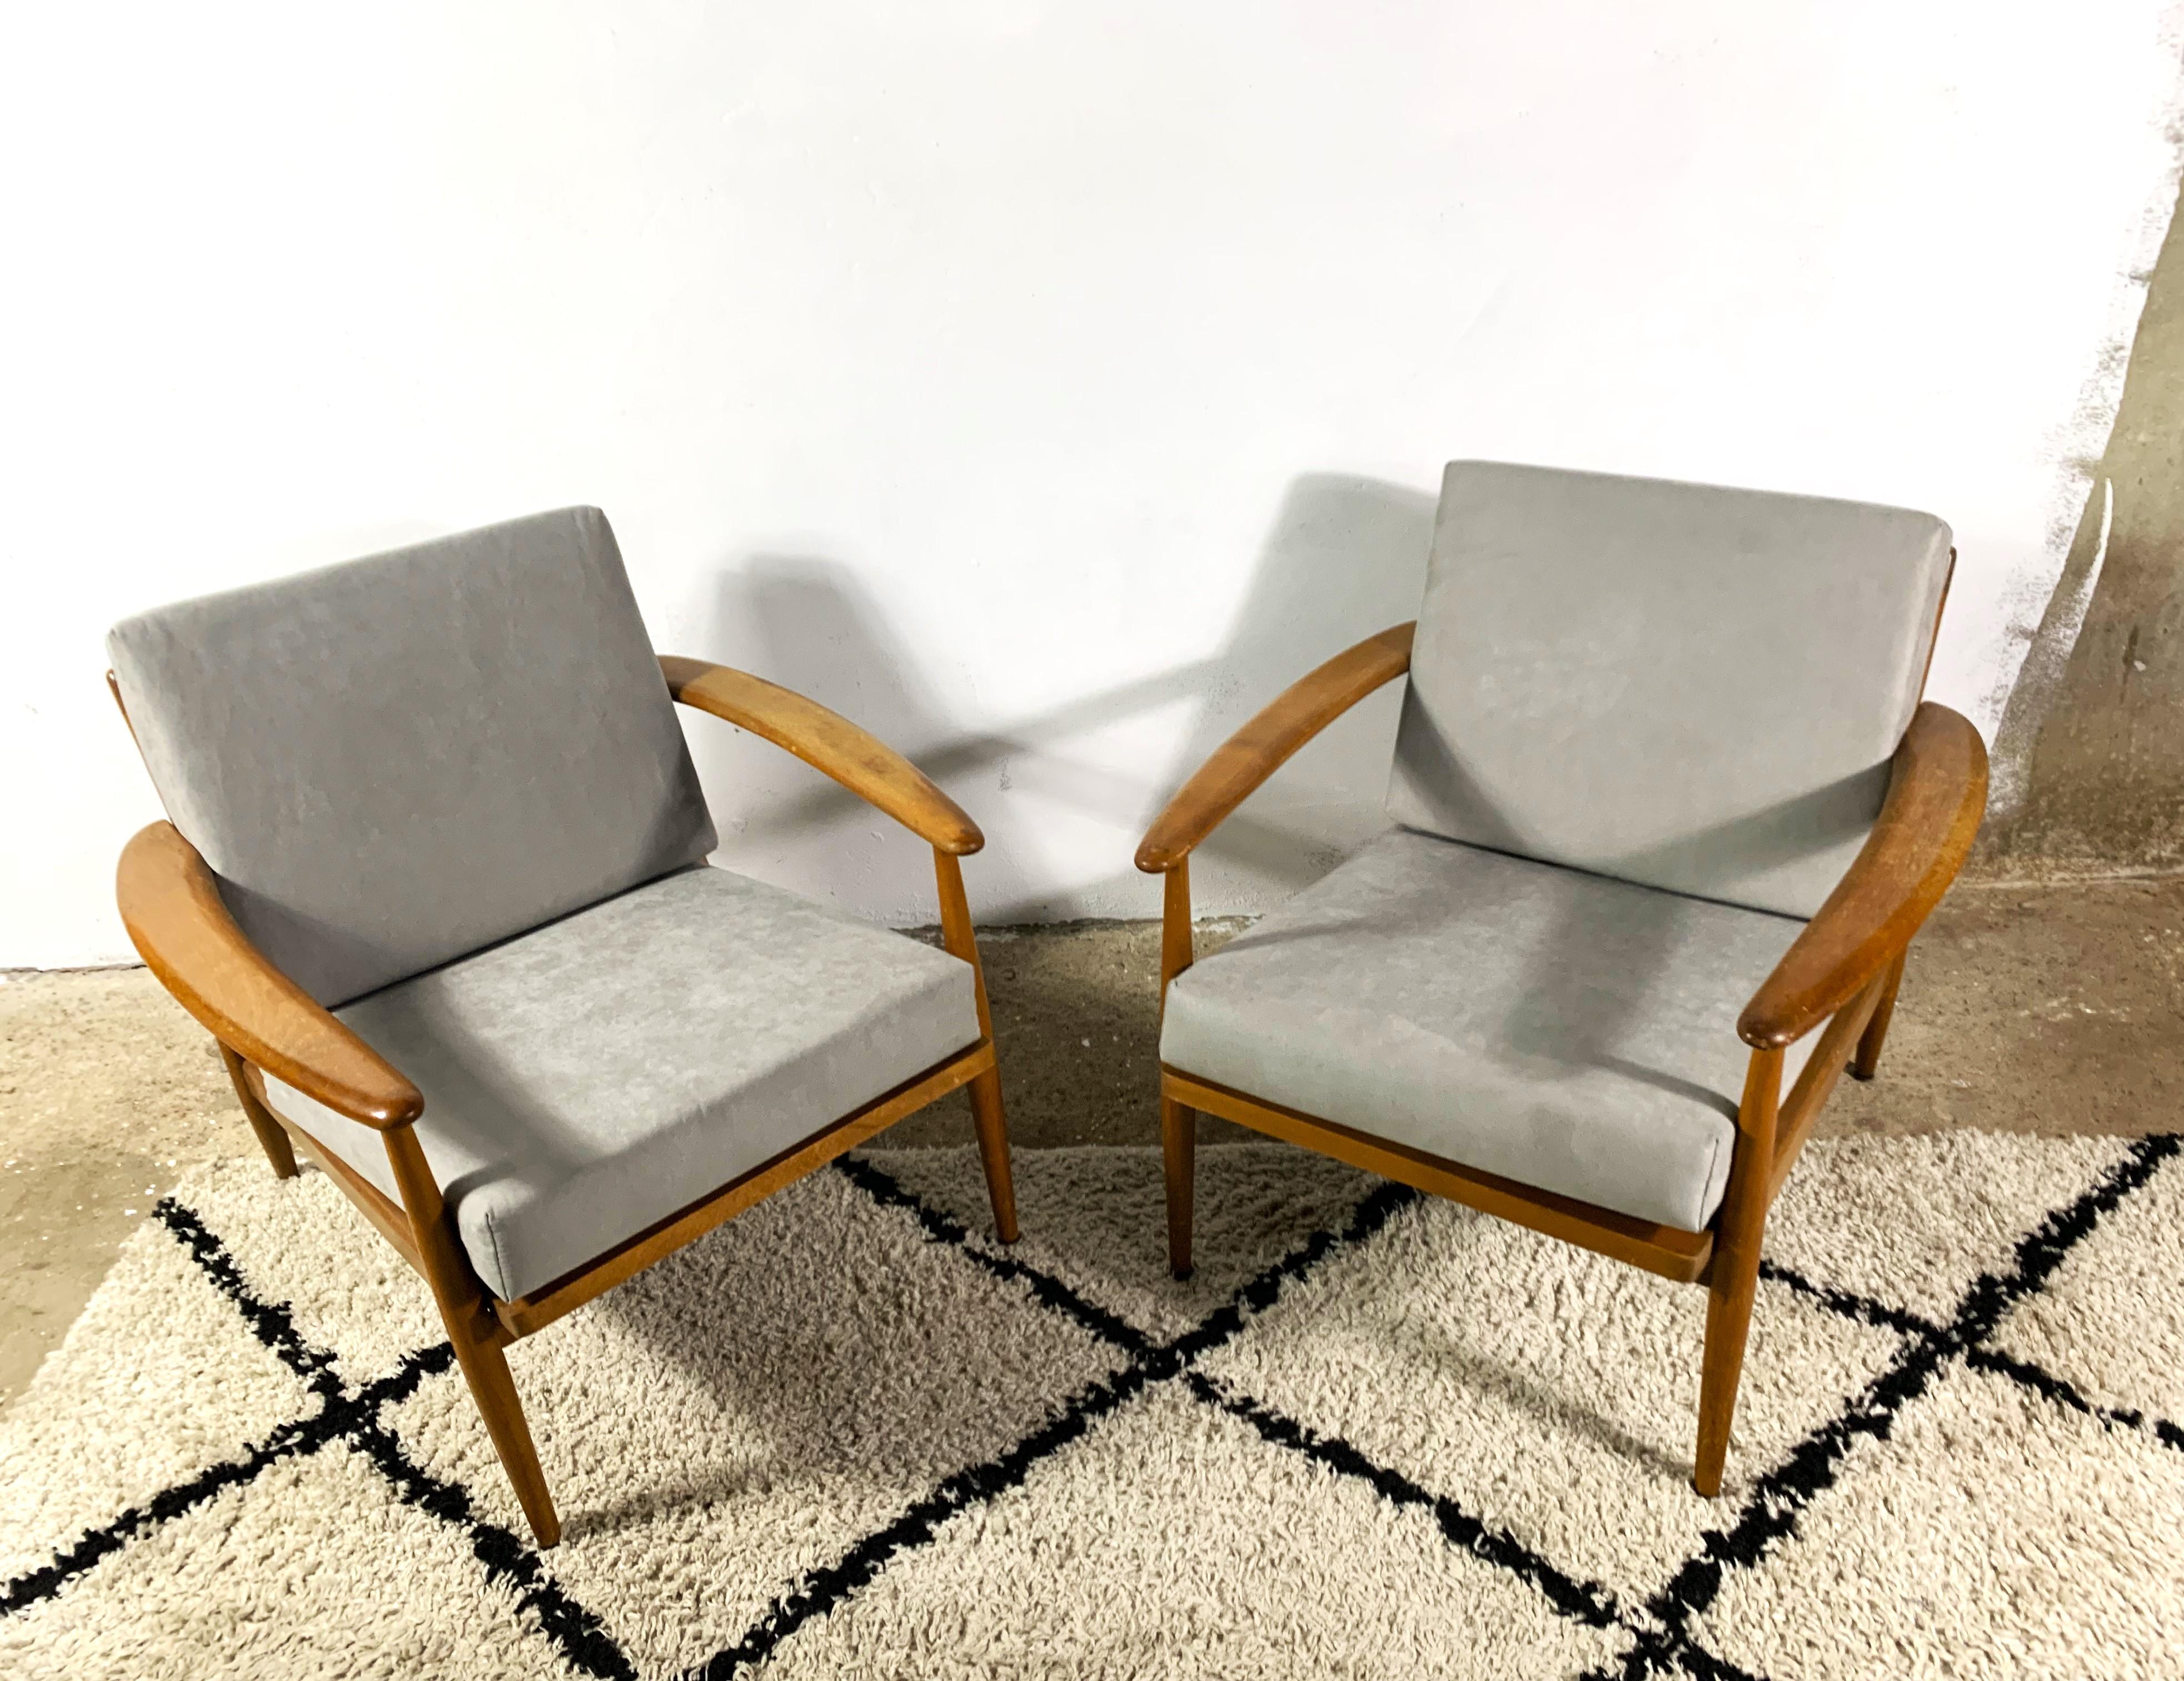 A pair of Scandinavian lounge chairs from the 1960s. The construction is made of varnished beech wood, in the style of Grete Jalk. The seat and backrest are cushions with new filling and new upholstery, removable for washing. Comfortable and stylish!